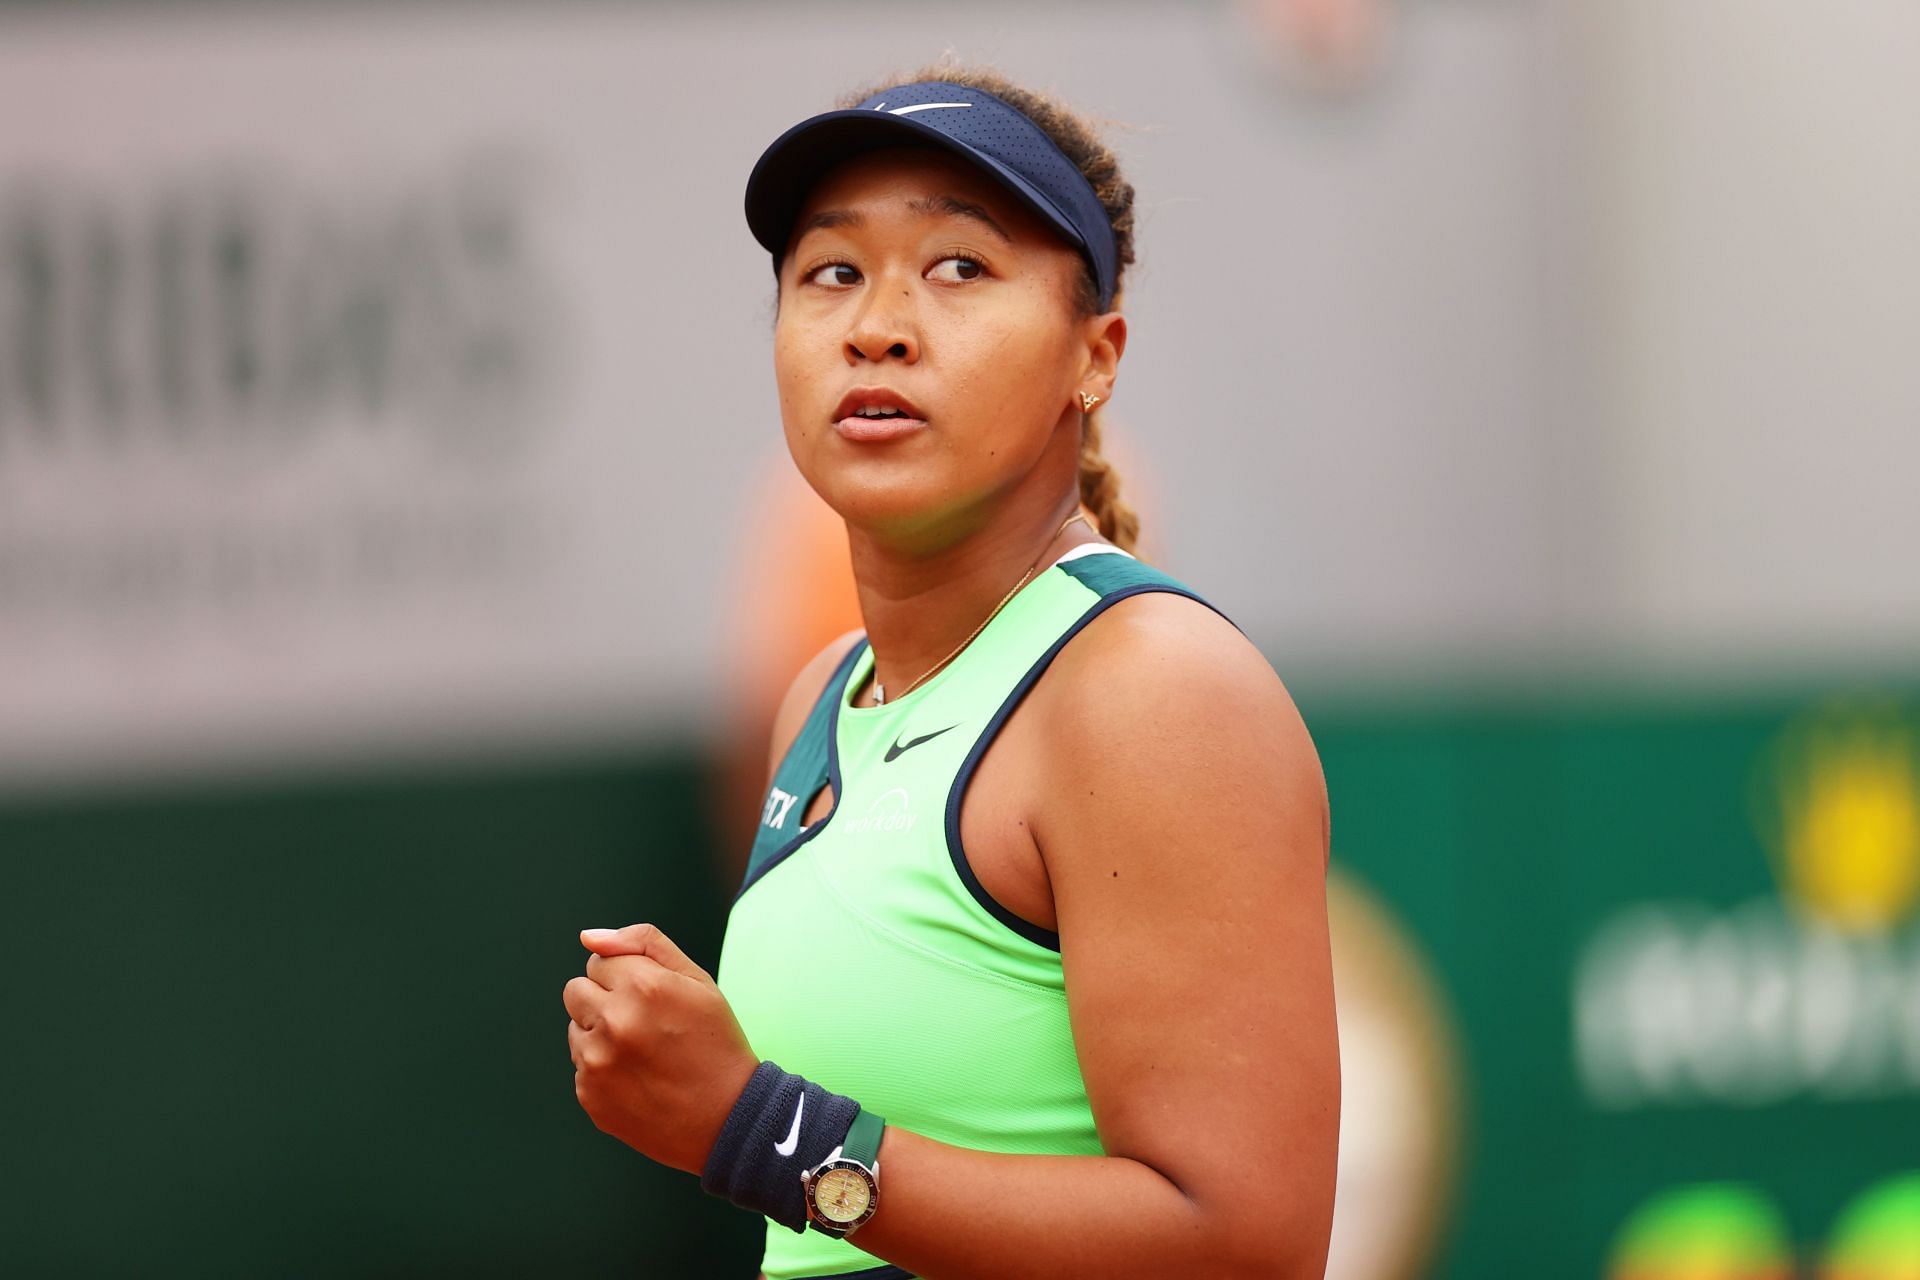 Where is Naomi Osaka playing next? A look at the Japanese stars schedule for the upcoming American hardcourt swing